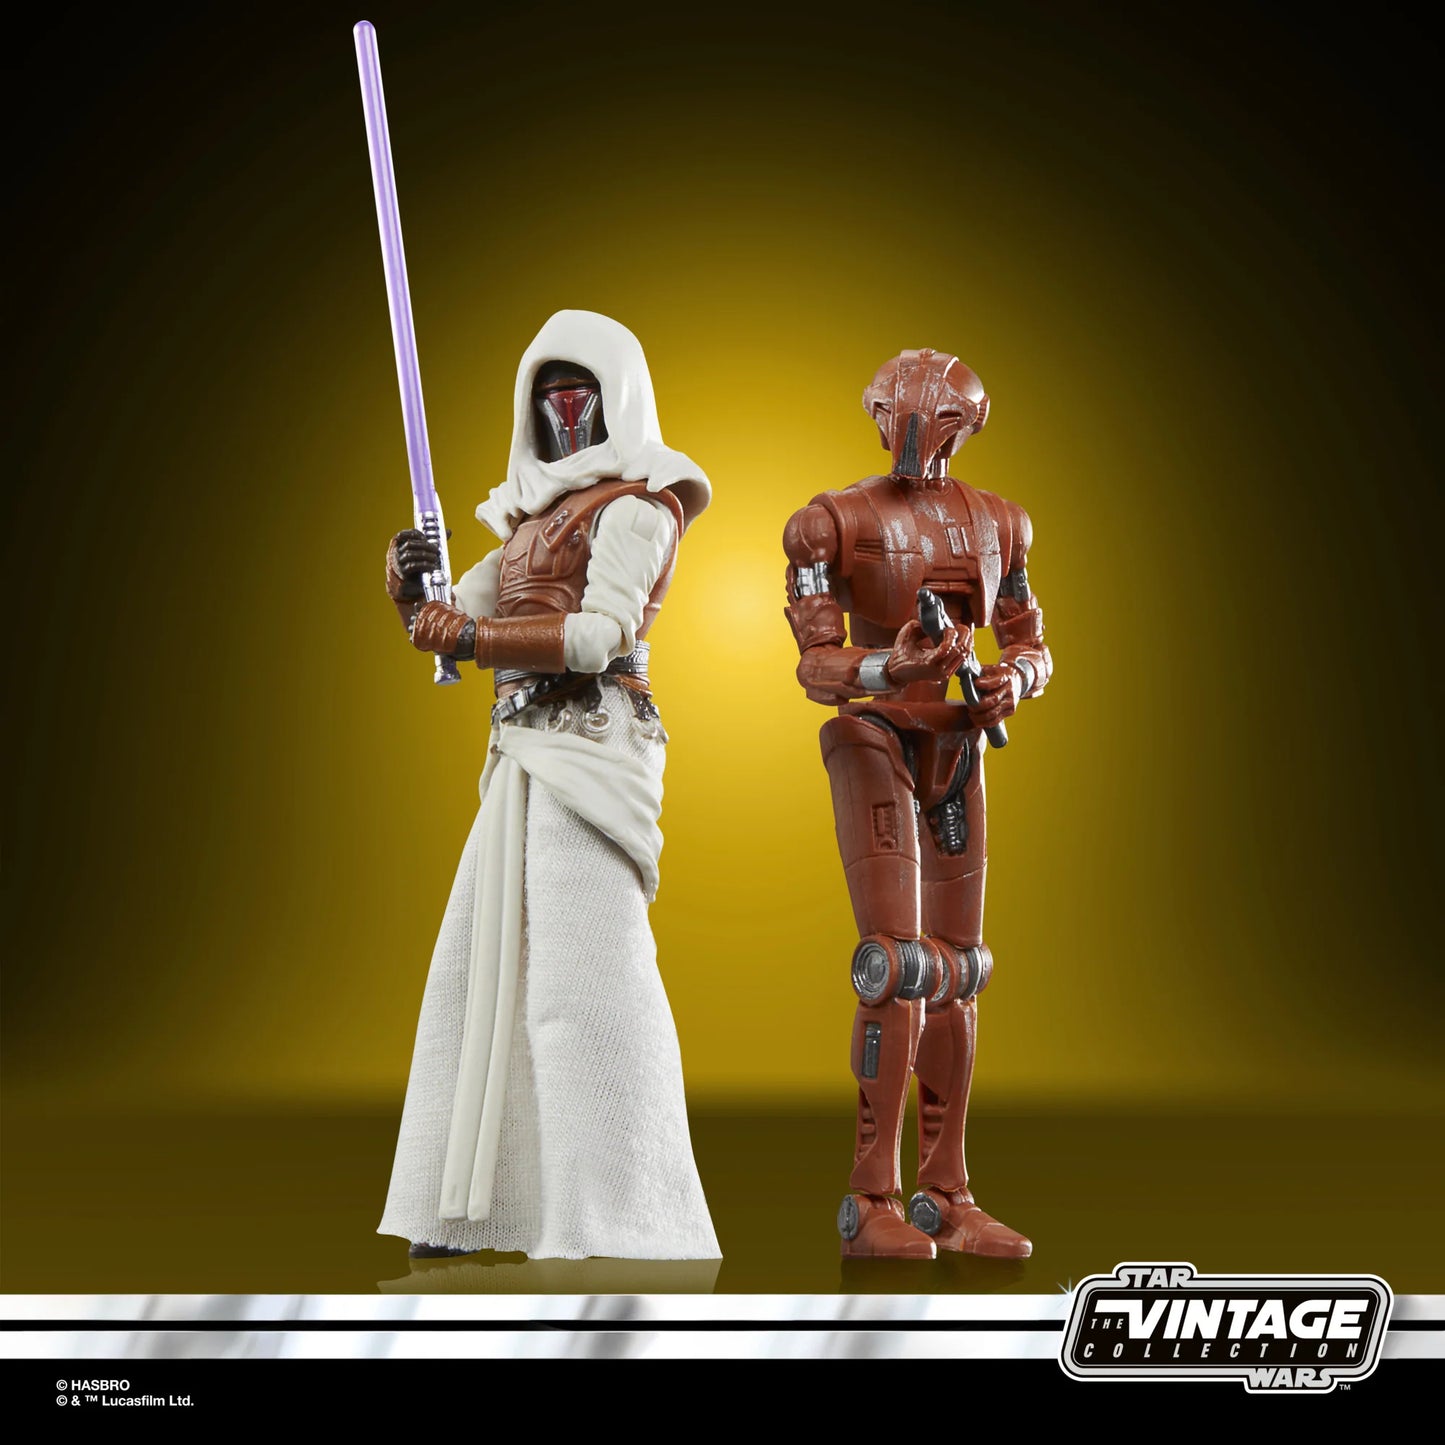 Star Wars The Vintage Collection HK47 & Jedi Knight Revan Galaxy of Heroes